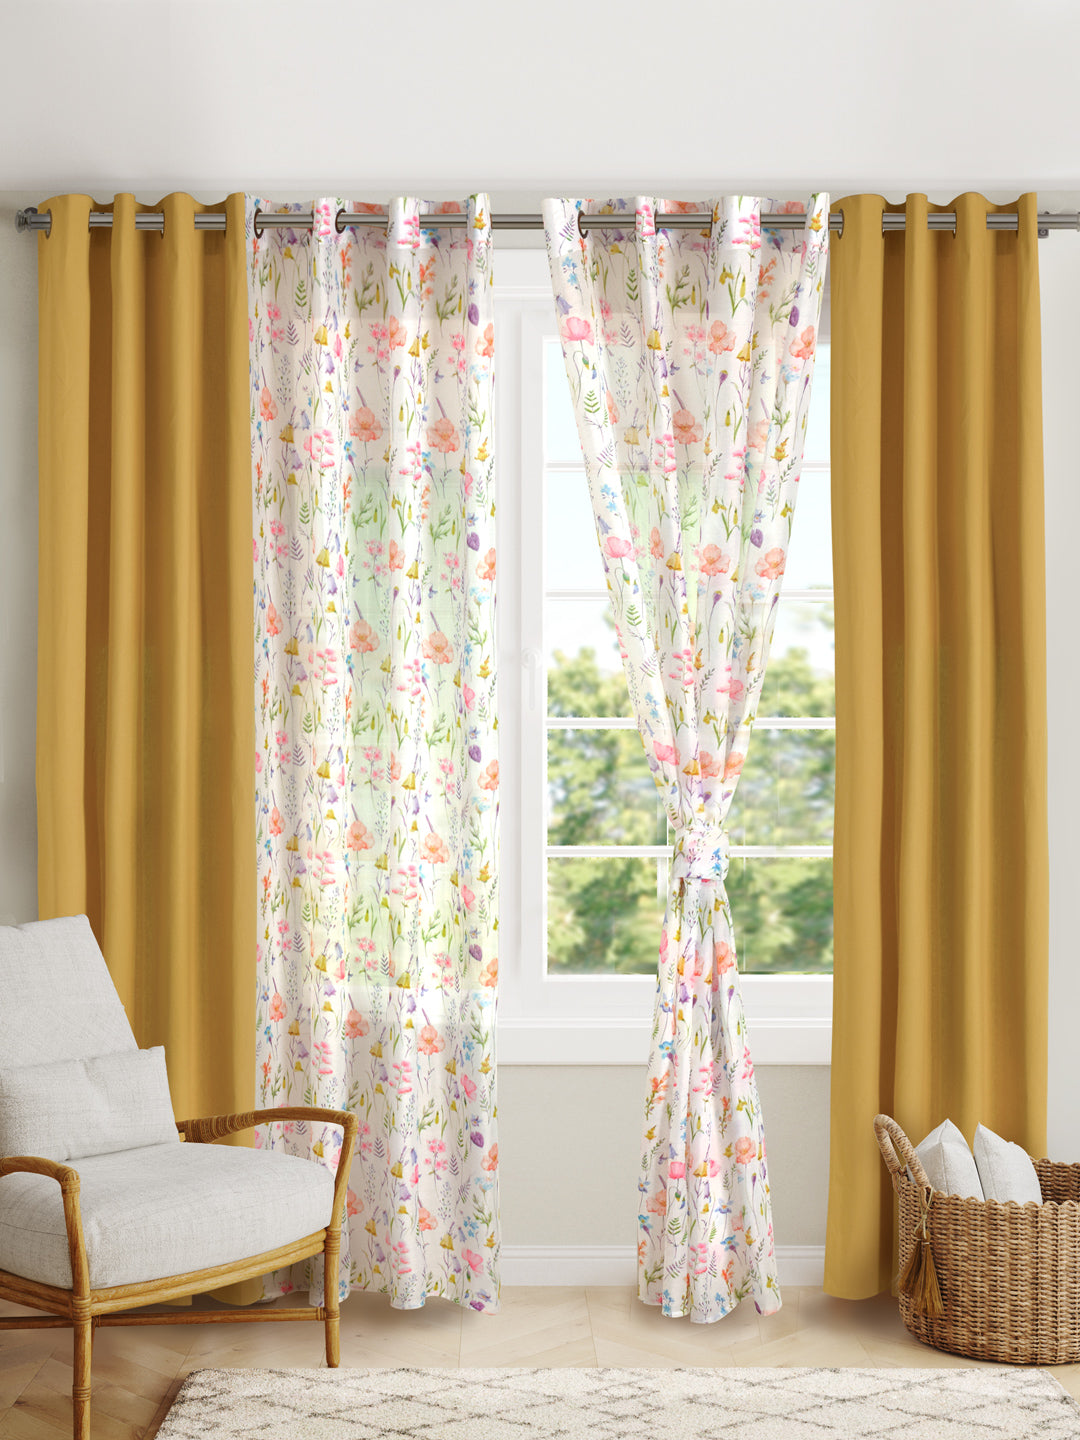 Blanc9 Set Of 4 Floral Garden Printed With Mustard Plain 7Ft. Curtain